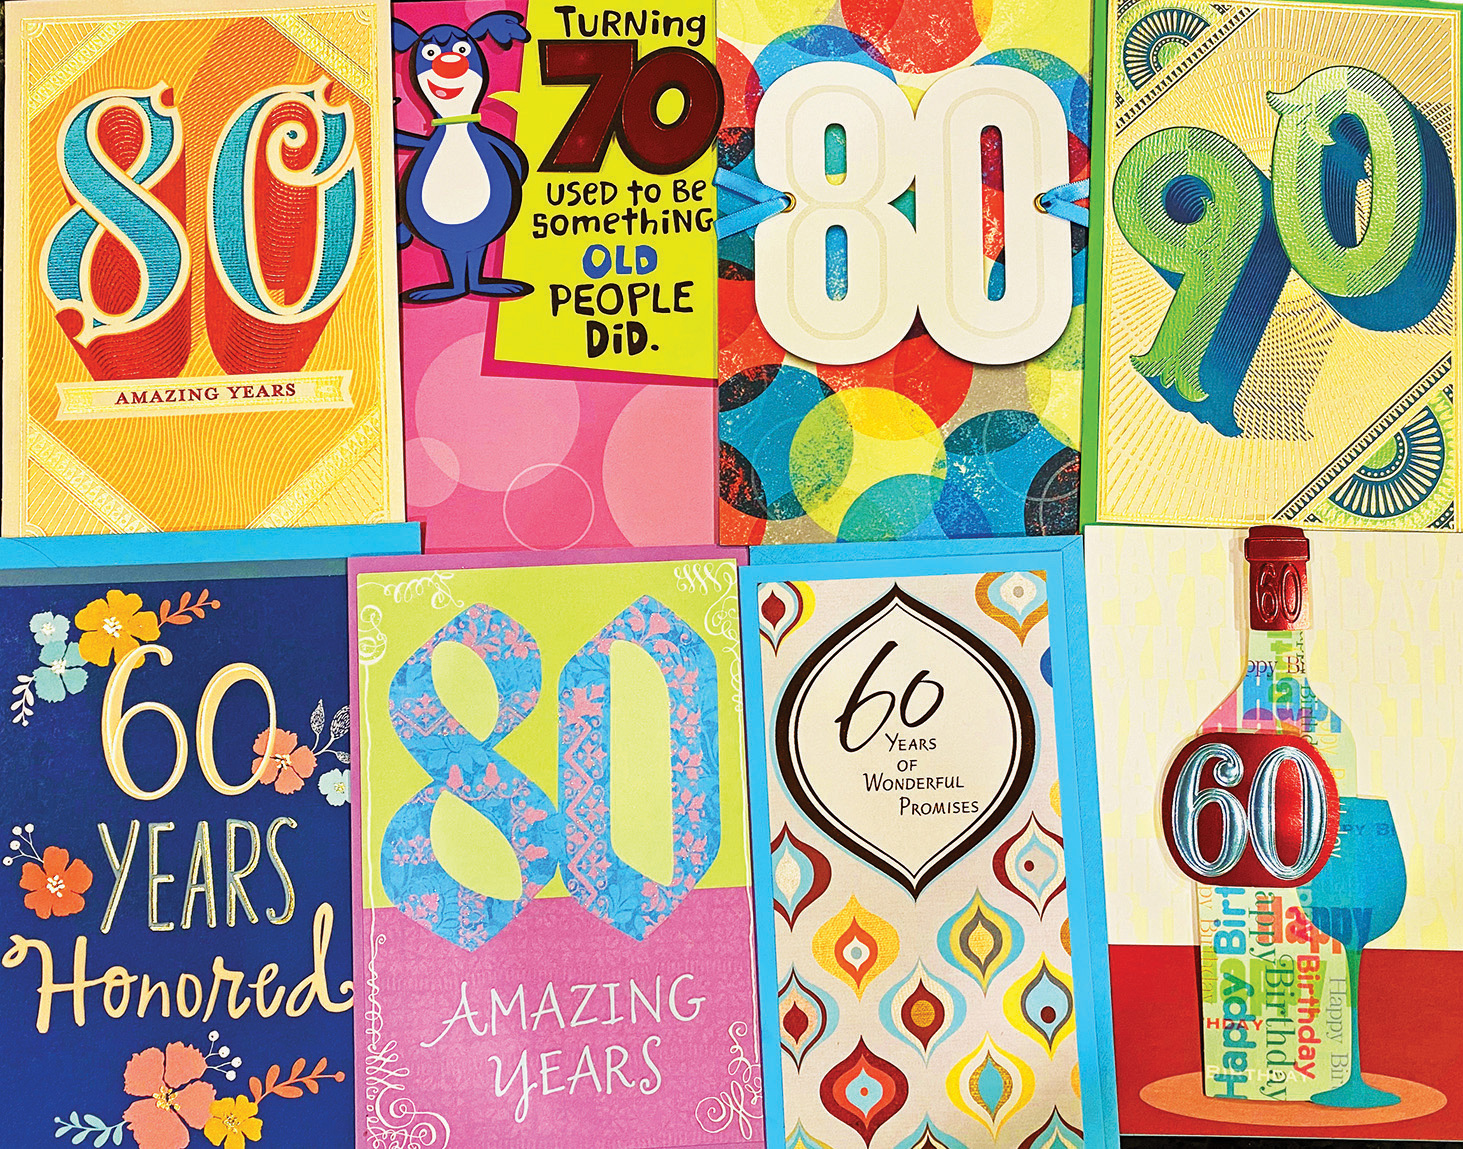 Milestone birthday cards are among the many types of Crystal Cards available.